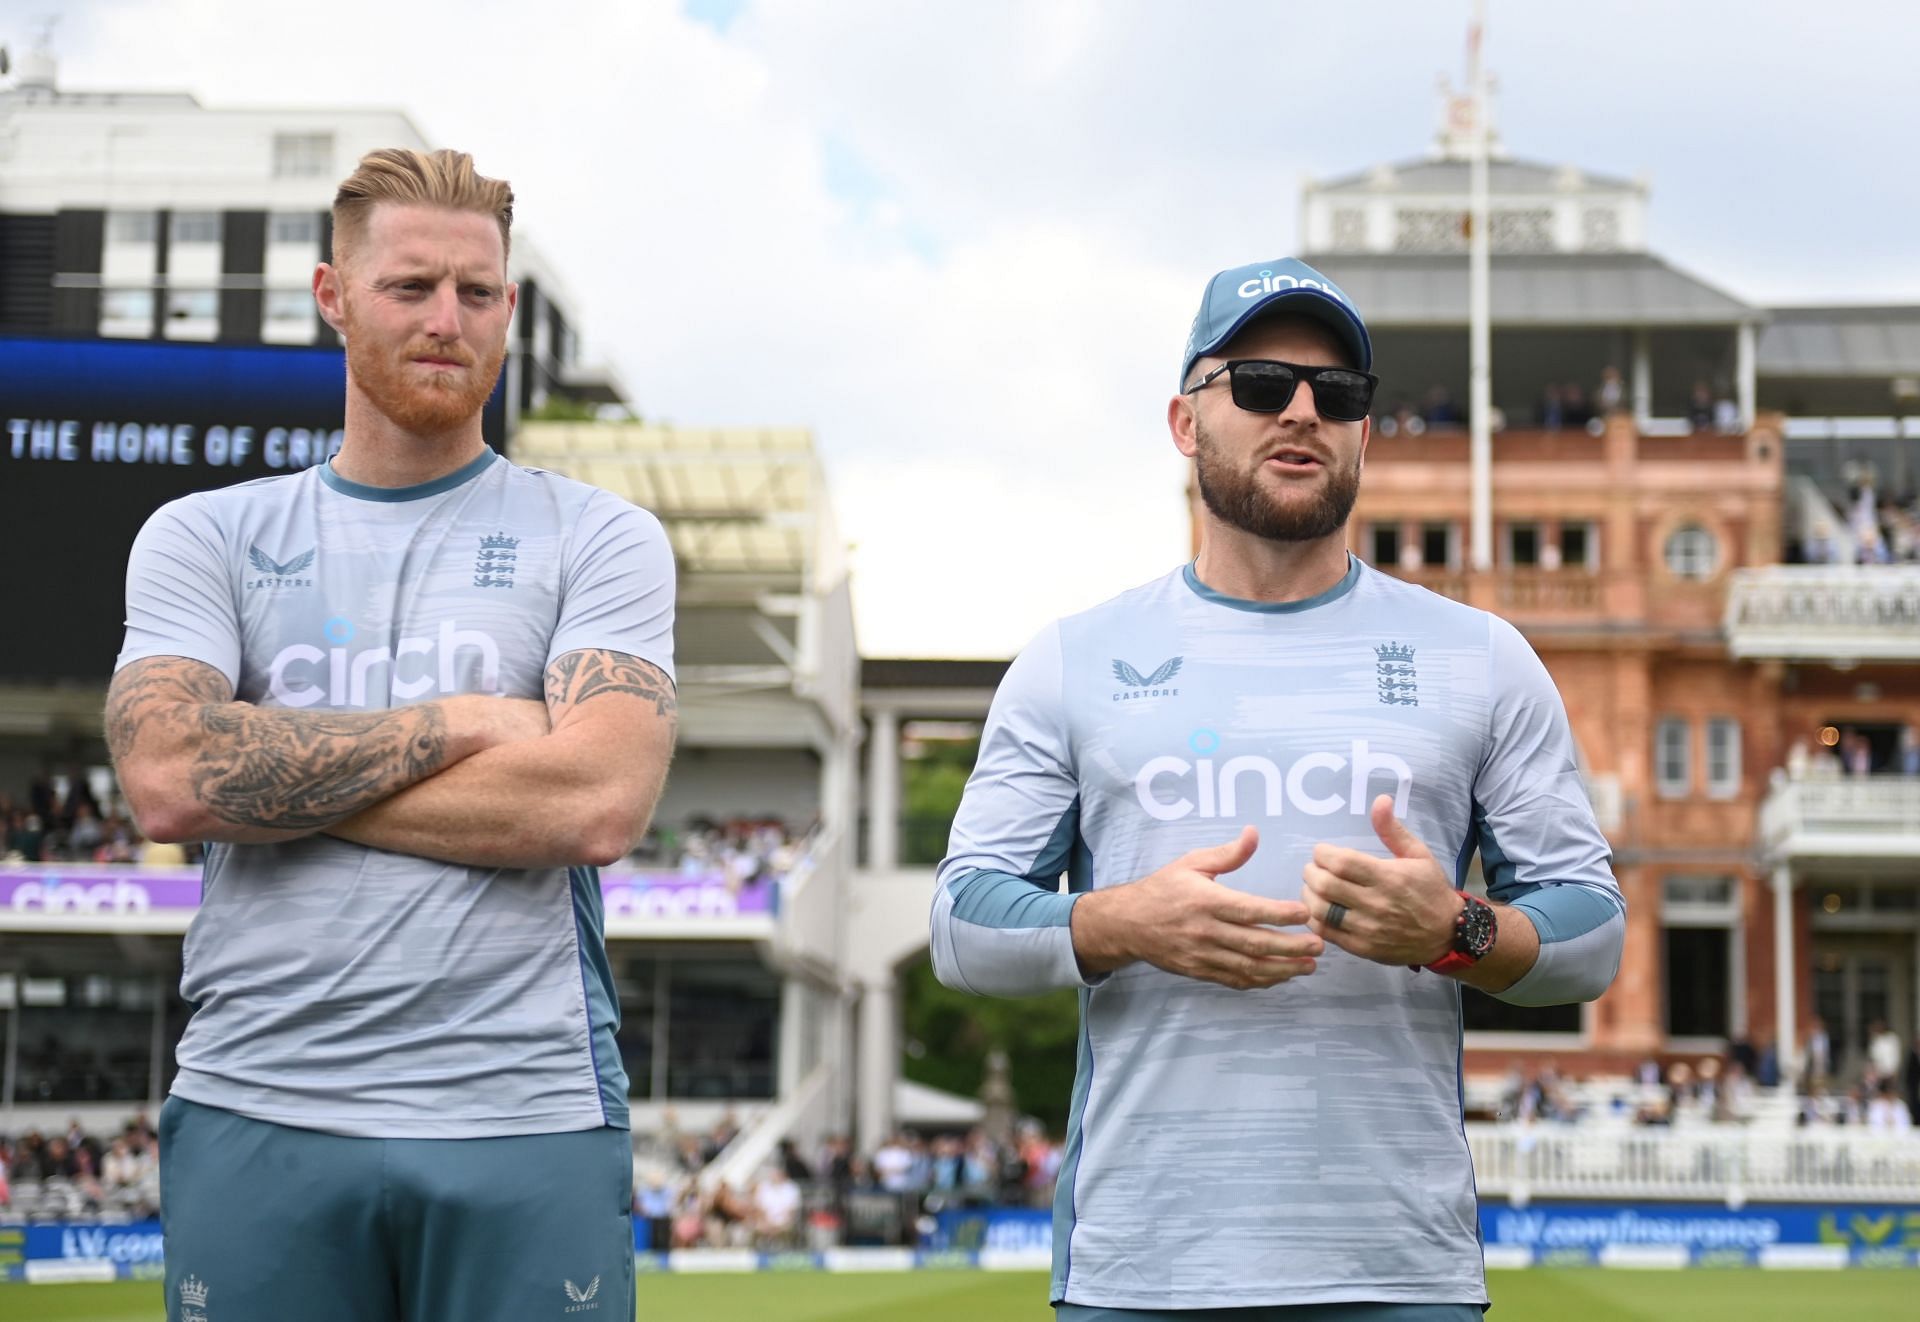 Ben Stokes and Brendon McCullum have proven to be a dynamic duo so far in the Test circuit